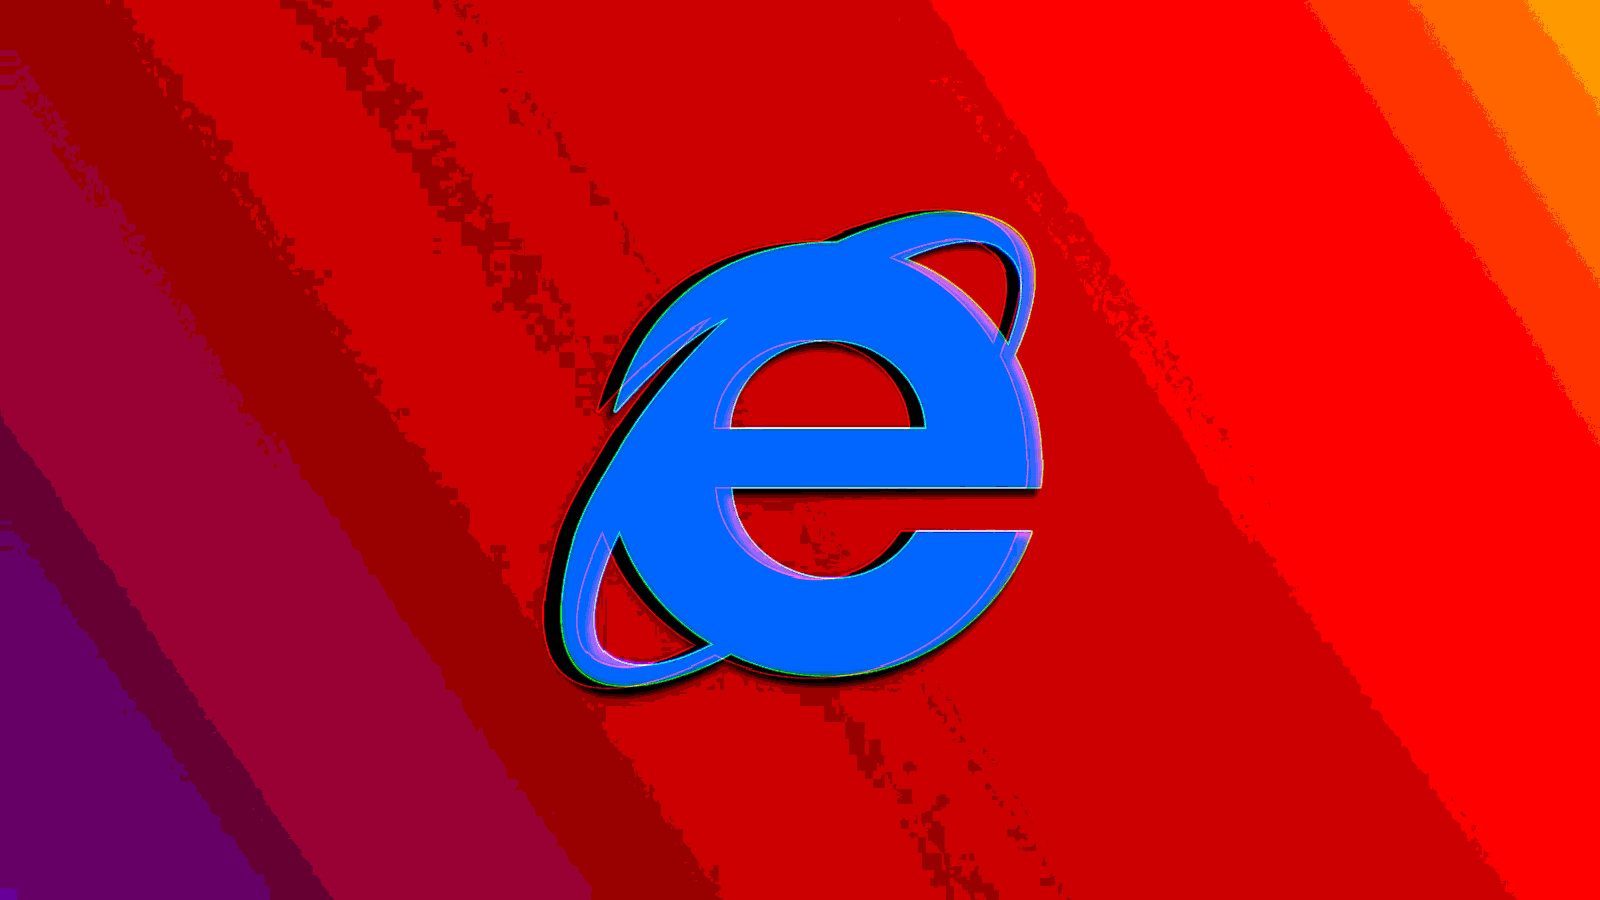 Microsoft shares more info on the end of Internet Explorer – Source: www.bleepingcomputer.com